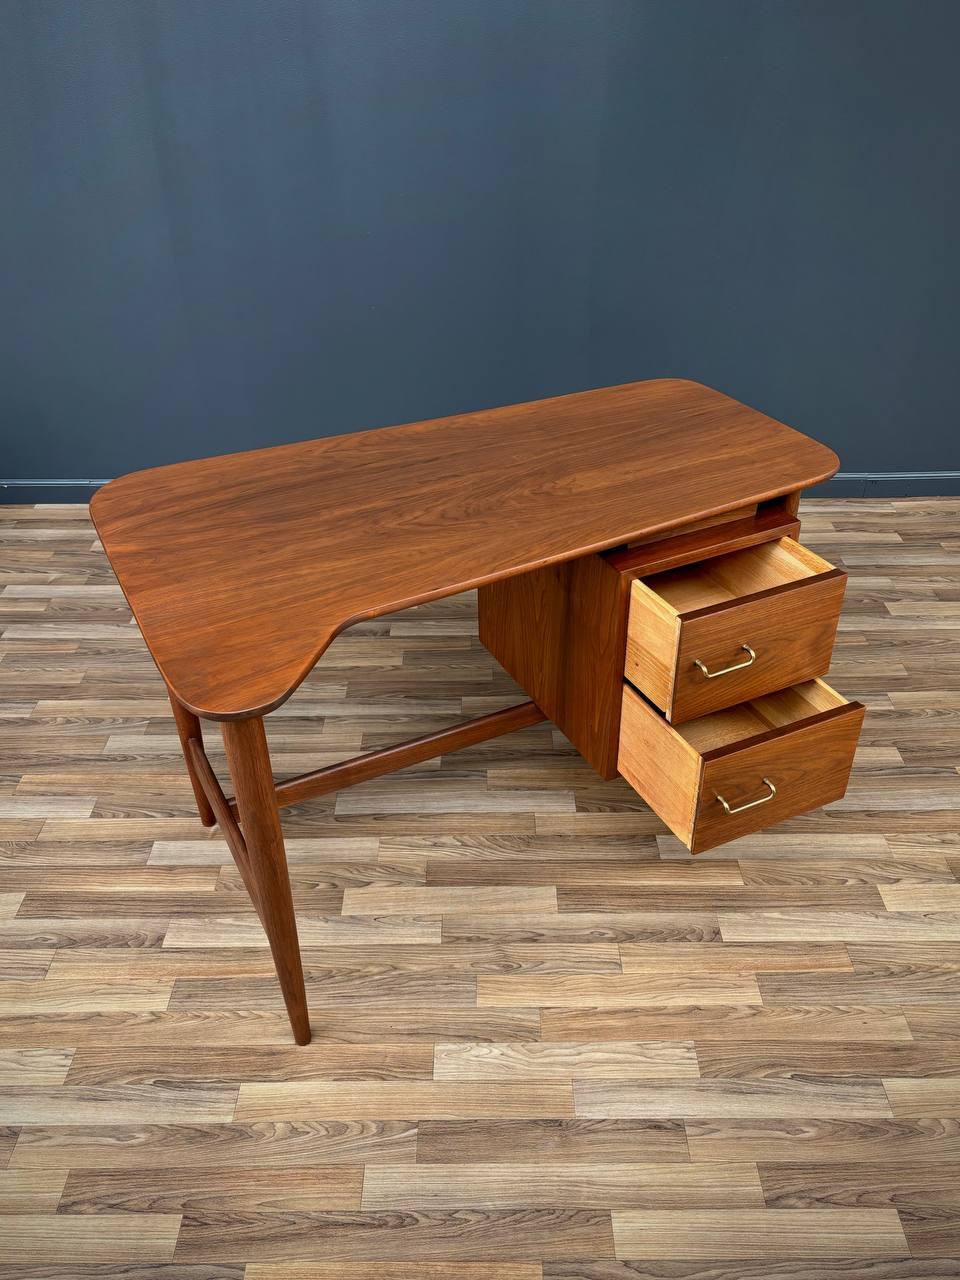 Newly Refinished - Mid-Century Modern Desk by Merton Gershun  In Excellent Condition For Sale In Los Angeles, CA